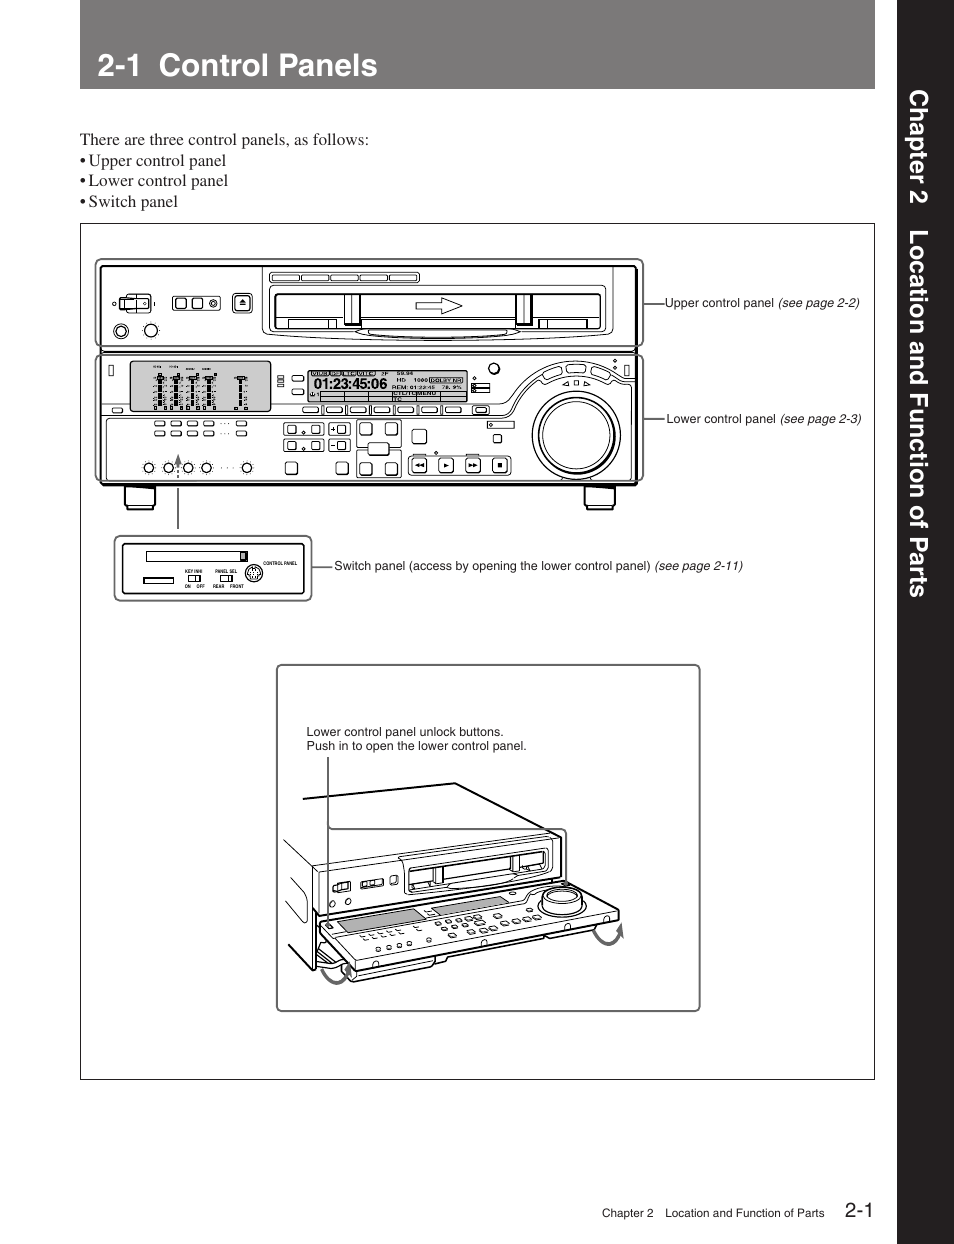 Chapter 2 location and function of parts, 1 control panels, Chapter 2 location and function of p ar ts | Sony HDW-M2100 User Manual | Page 9 / 115